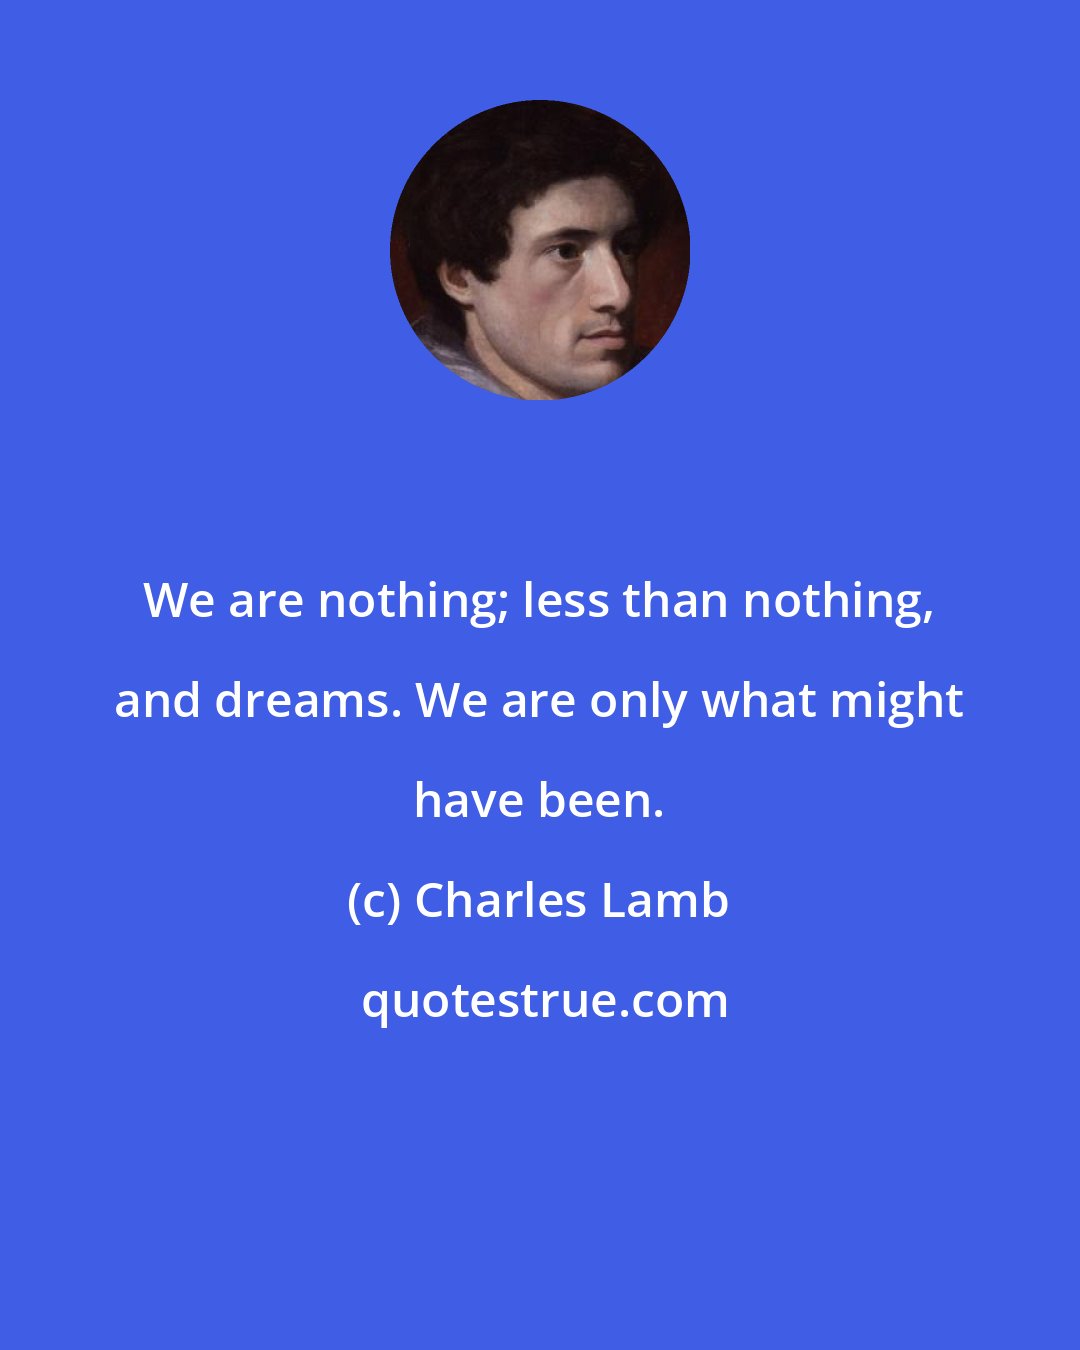 Charles Lamb: We are nothing; less than nothing, and dreams. We are only what might have been.